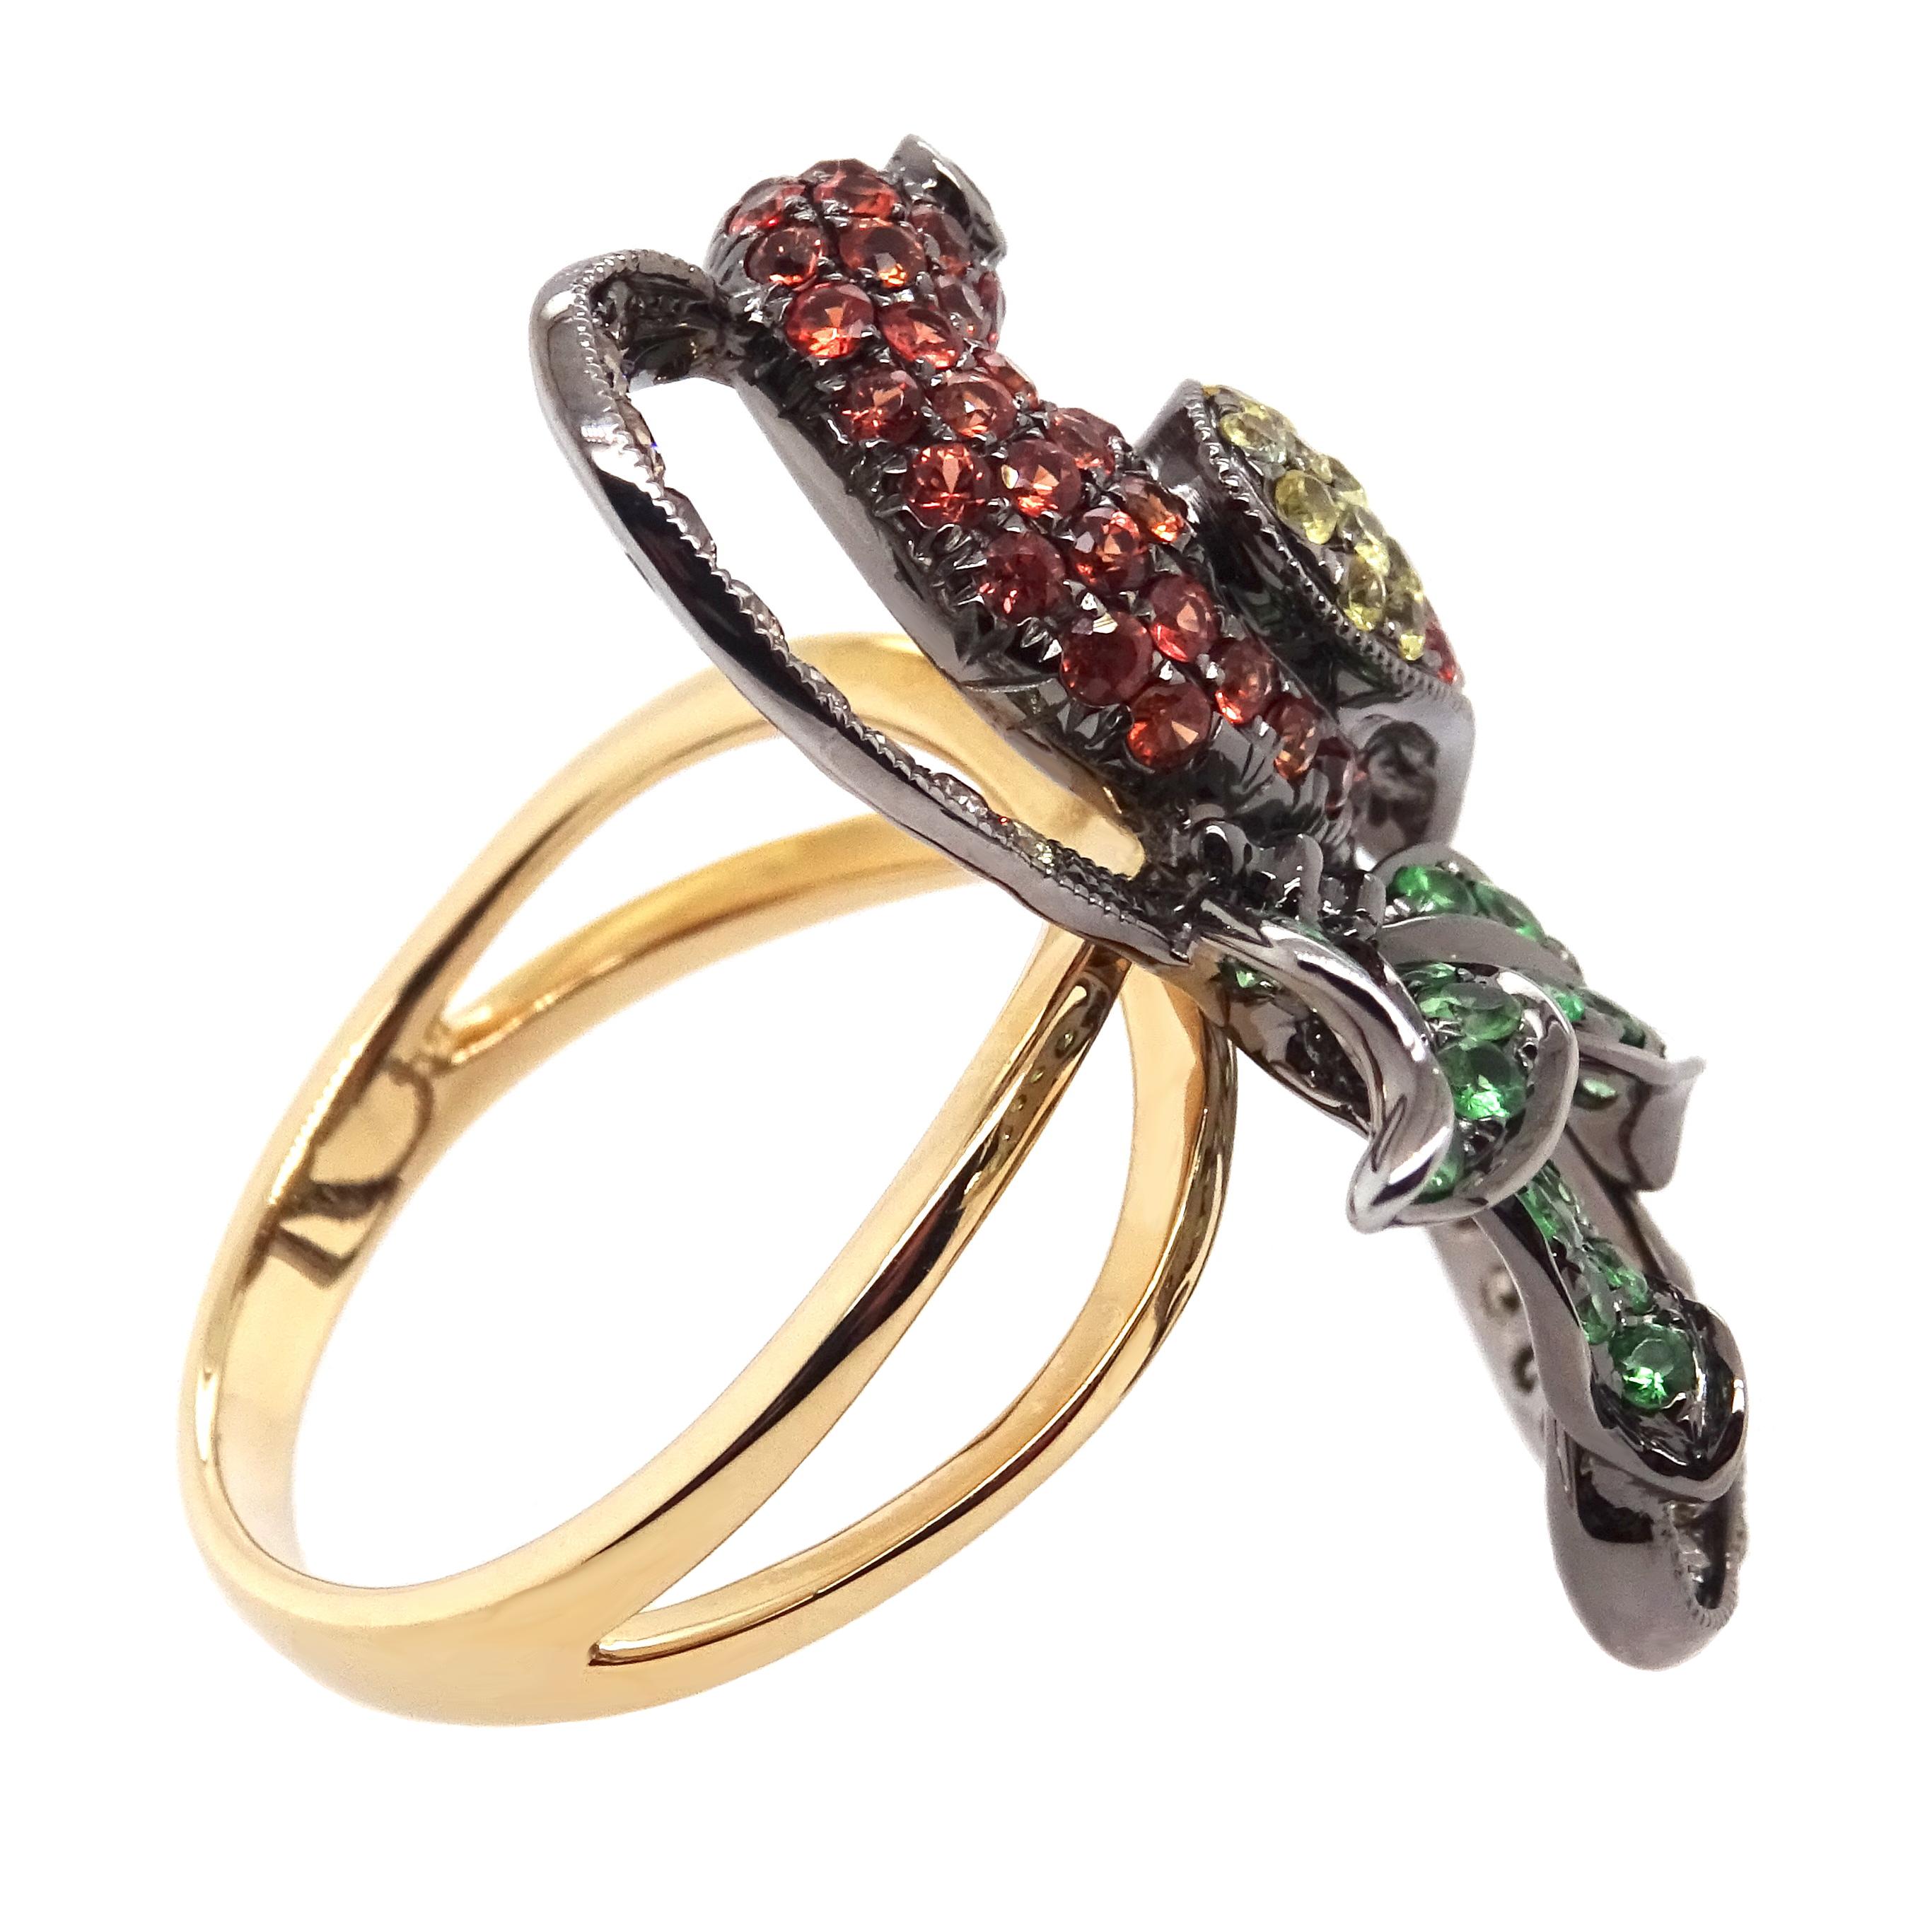 Round Cut 14K Gold Colourful Parrot Ring with Diamonds, Garnets and Sapphires For Sale